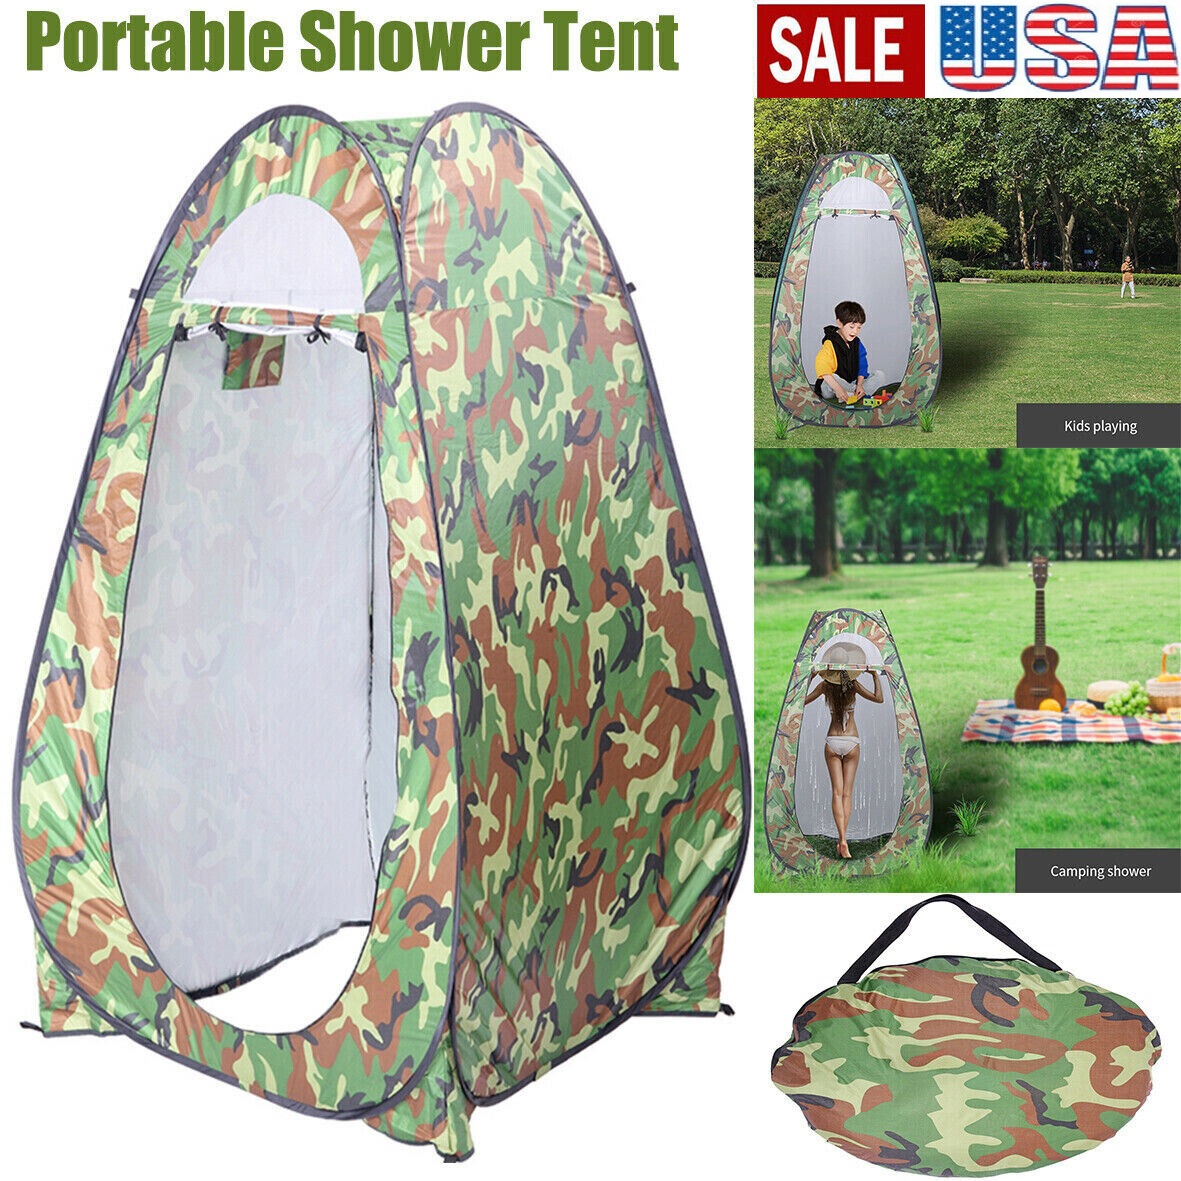 US IN STOCK- Shower Tents For Camping Pop-Up Privacy TentPortable Shower Tent Outdoor Camp Bathroom Changing Dressing Room Instant Privacy Shelters for Hiking Beach Picnic Fishing Potty - image 2 of 13